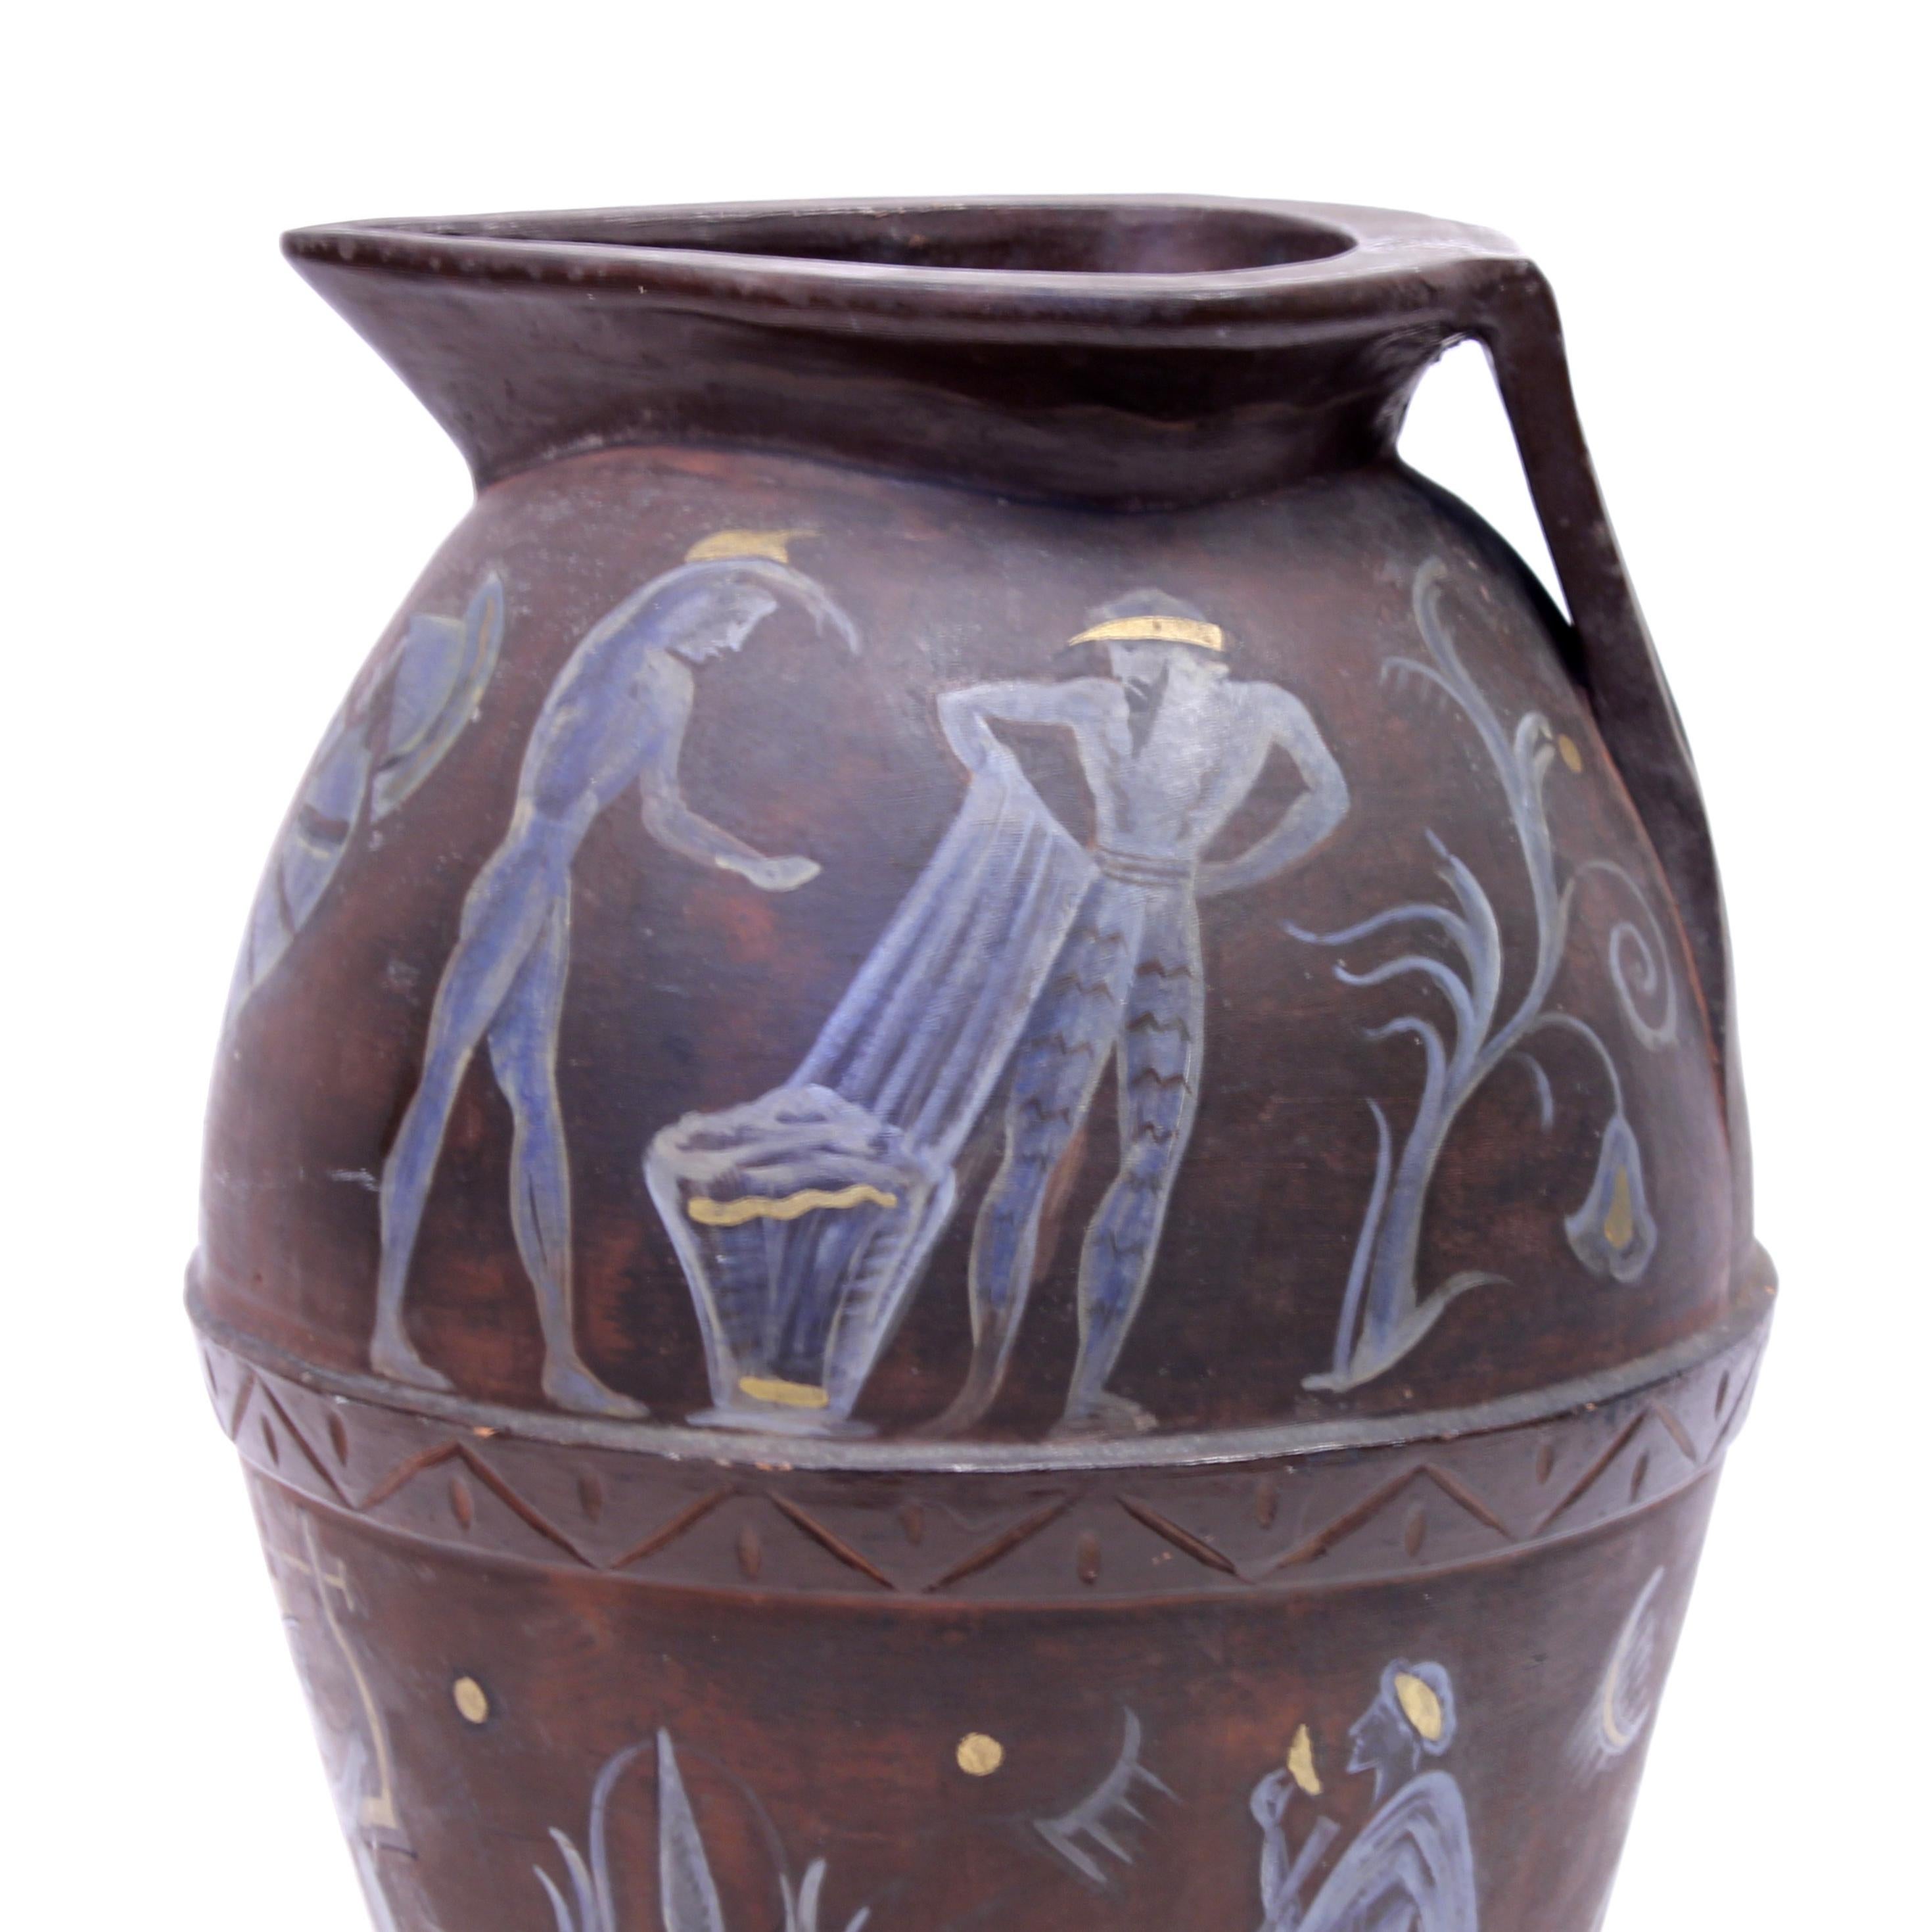 Very rare and magnificent large painted Italian terracotta urn, pot or olive jar depicting ancient Greek mythology scenes made by Angelo Ricerri in the 1910s or 1920s. The top has a handle on one side and a spout on the other. Marked by maker: